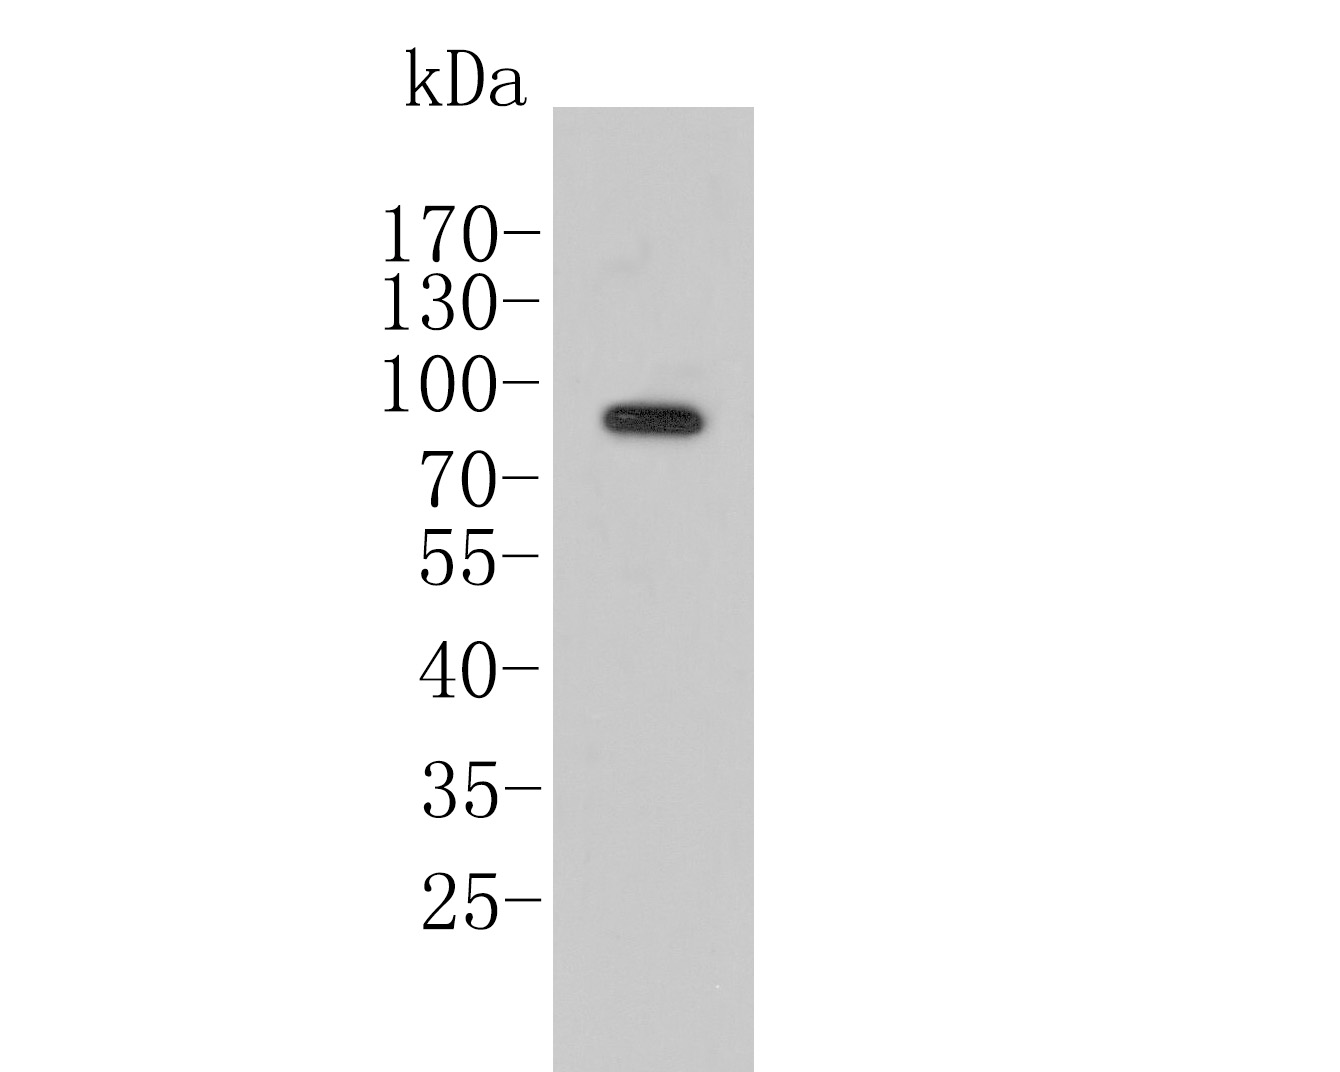 Western blot analysis of CCNT1 on HL-60 cell lysate. Proteins were transferred to a PVDF membrane and blocked with 5% BSA in PBS for 1 hour at room temperature. The primary antibody (<a href="/products/HA500313" style="font-weight: bold;text-decoration: underline;">HA500313</a>, 1/500) was used in 5% BSA at room temperature for 2 hours. Goat Anti-Rabbit IgG - HRP Secondary Antibody (<a href="/products/HA1001" style="font-weight: bold;text-decoration: underline;">HA1001</a>) at 1:200,000 dilution was used for 1 hour at room temperature.